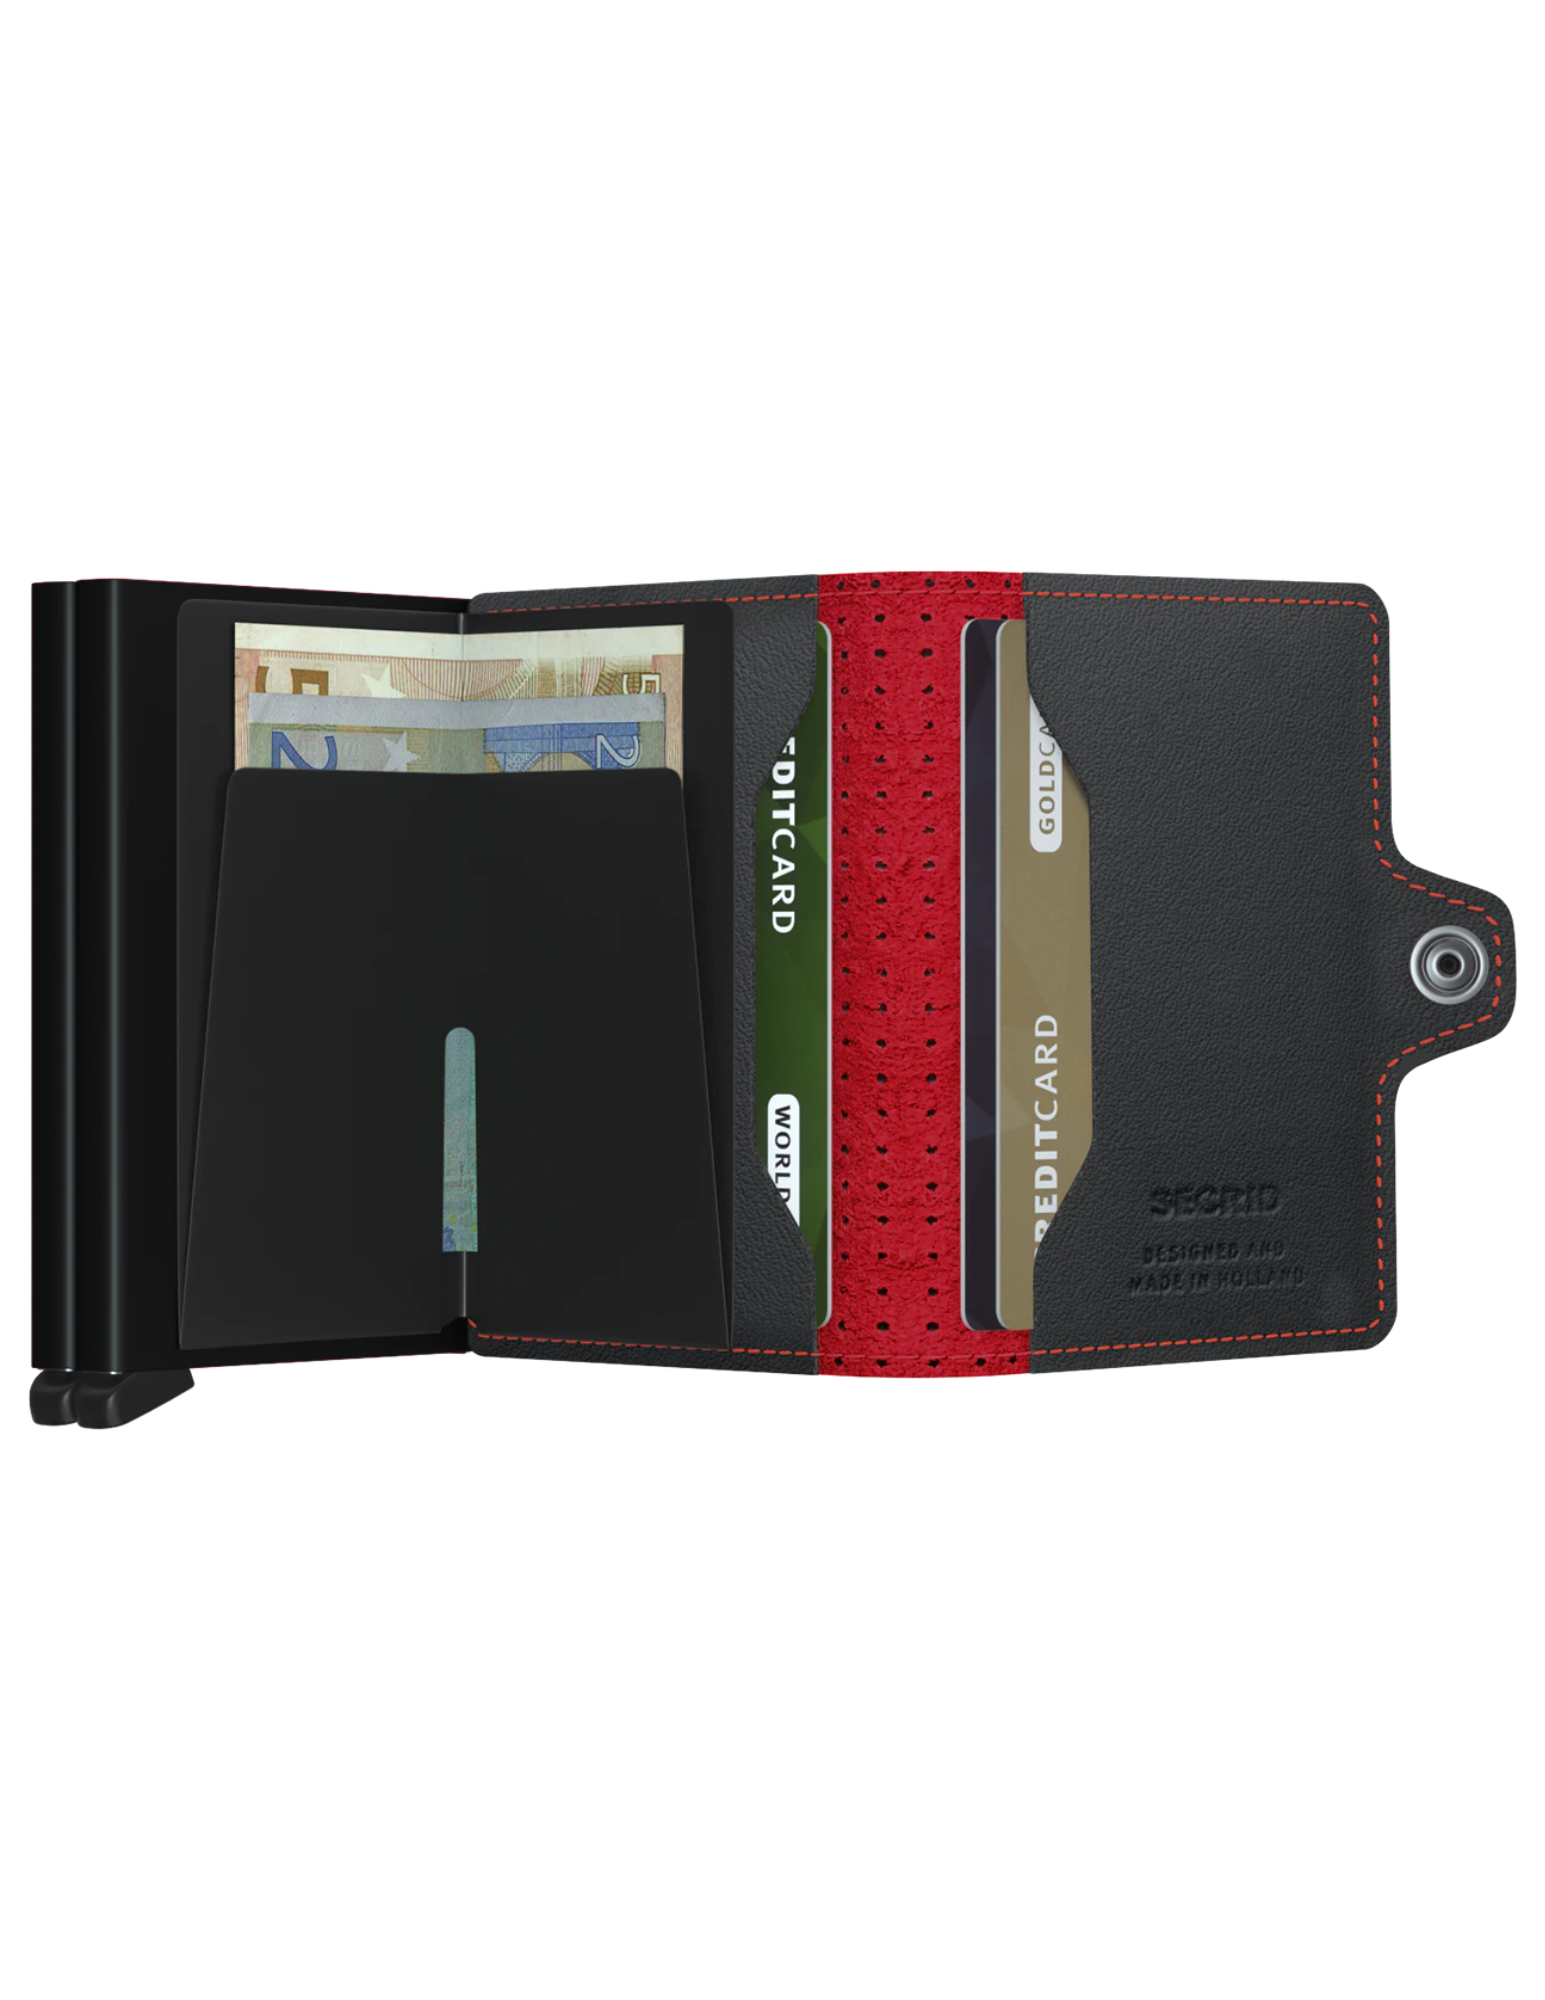 With two Cardprotectors to hold double the content, the Twinwallet carries up to 16 cards, banknotes and receipts, but remains compact in size. Together with its sturdy closure and exterior, to hold extra cards, banknotes and receipts, the Twinwallet holds much but remains compact in size